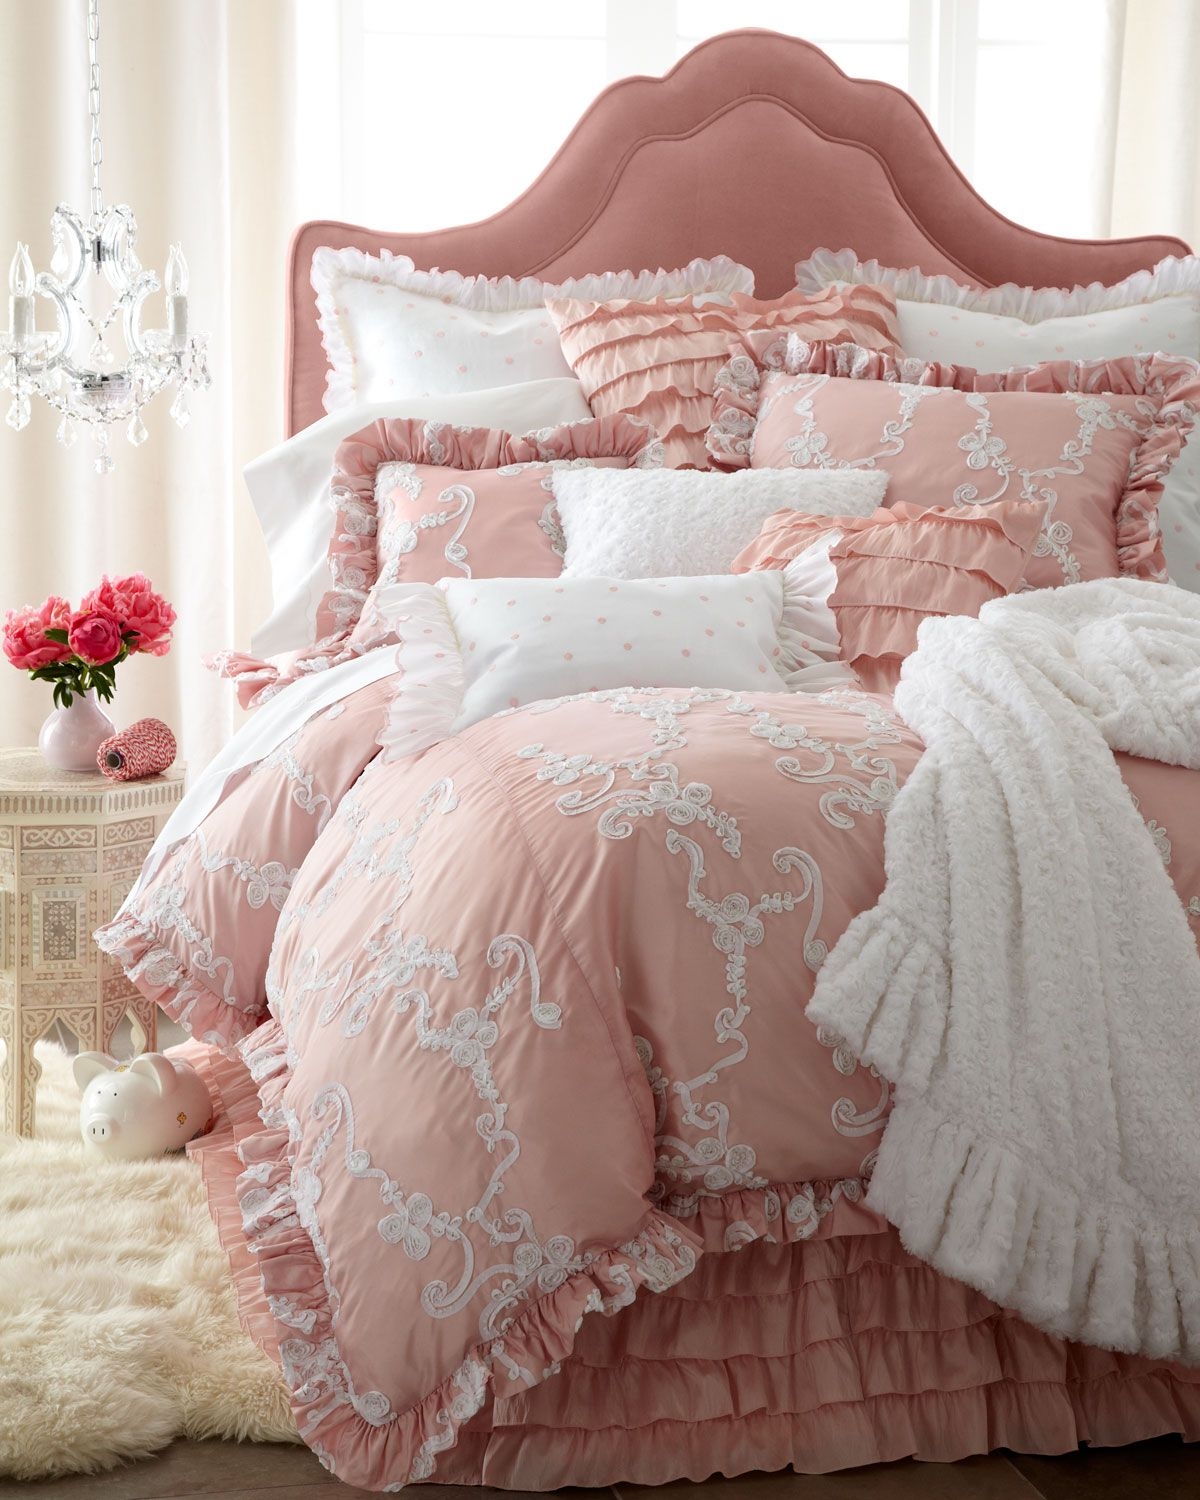 Frilly bedding sets